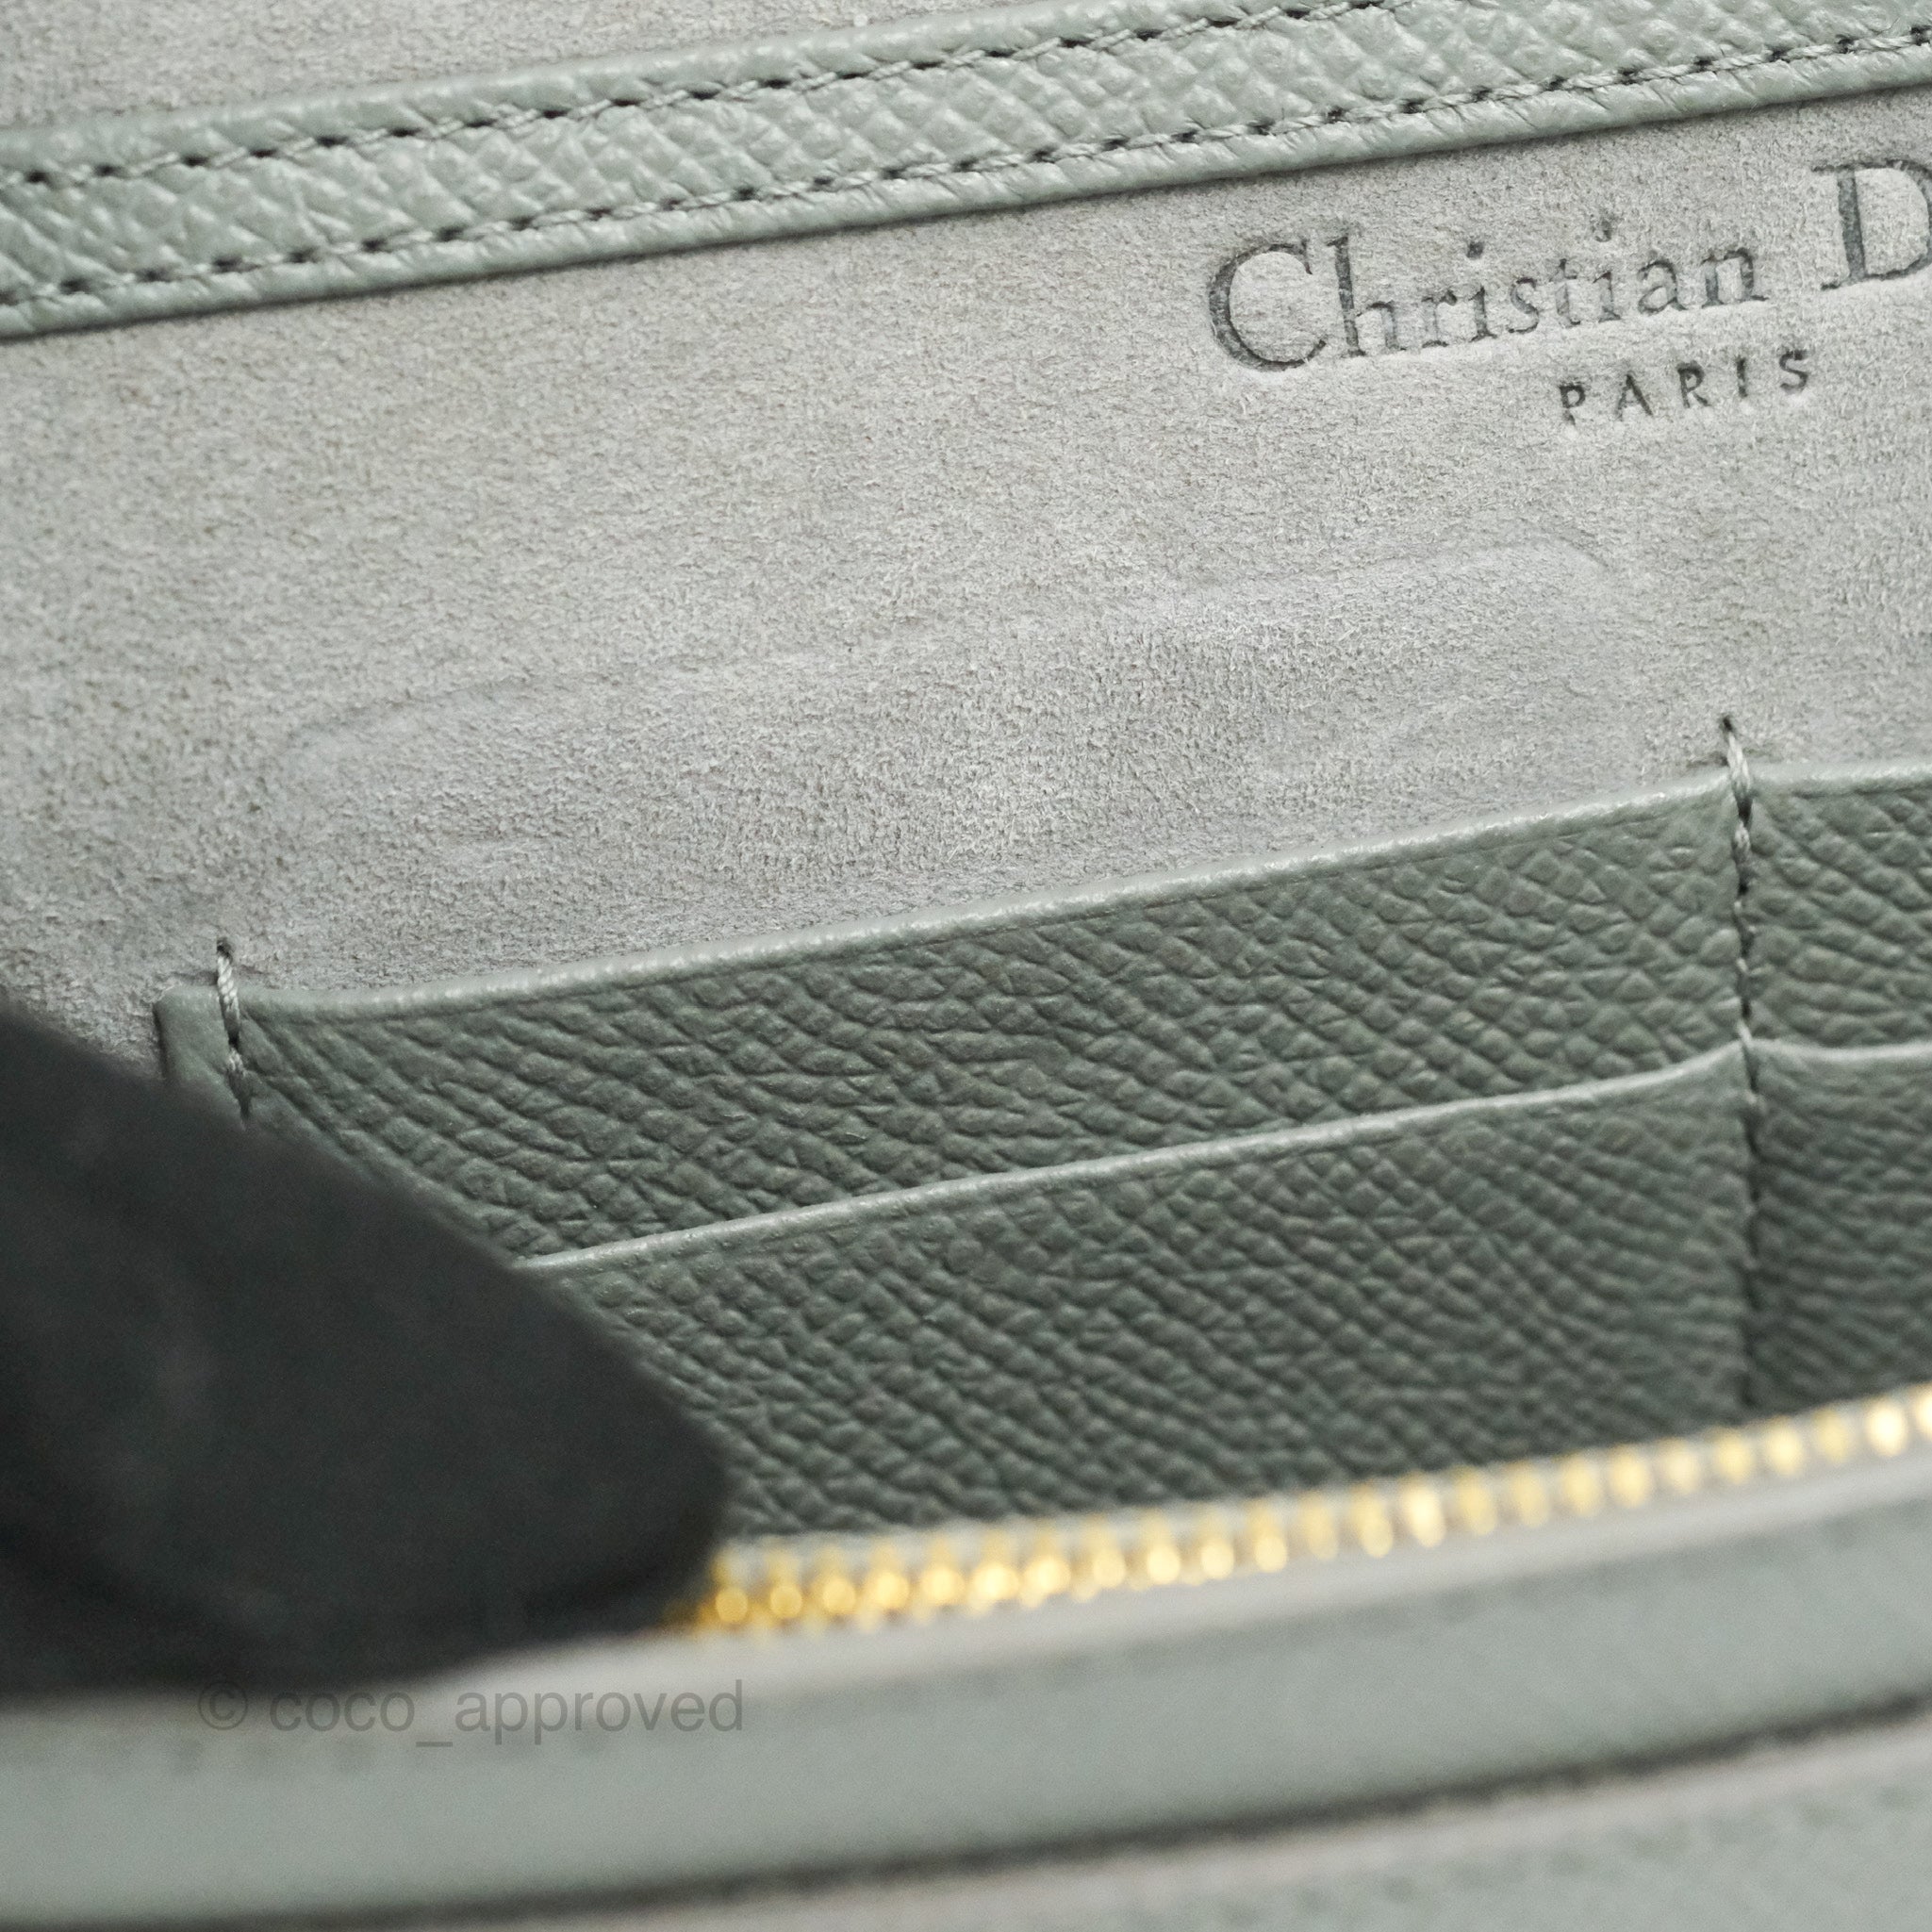 CHRISTIAN DIOR Grained Calfskin 30 Montaigne 2 in 1 Pouch Grey 1302609